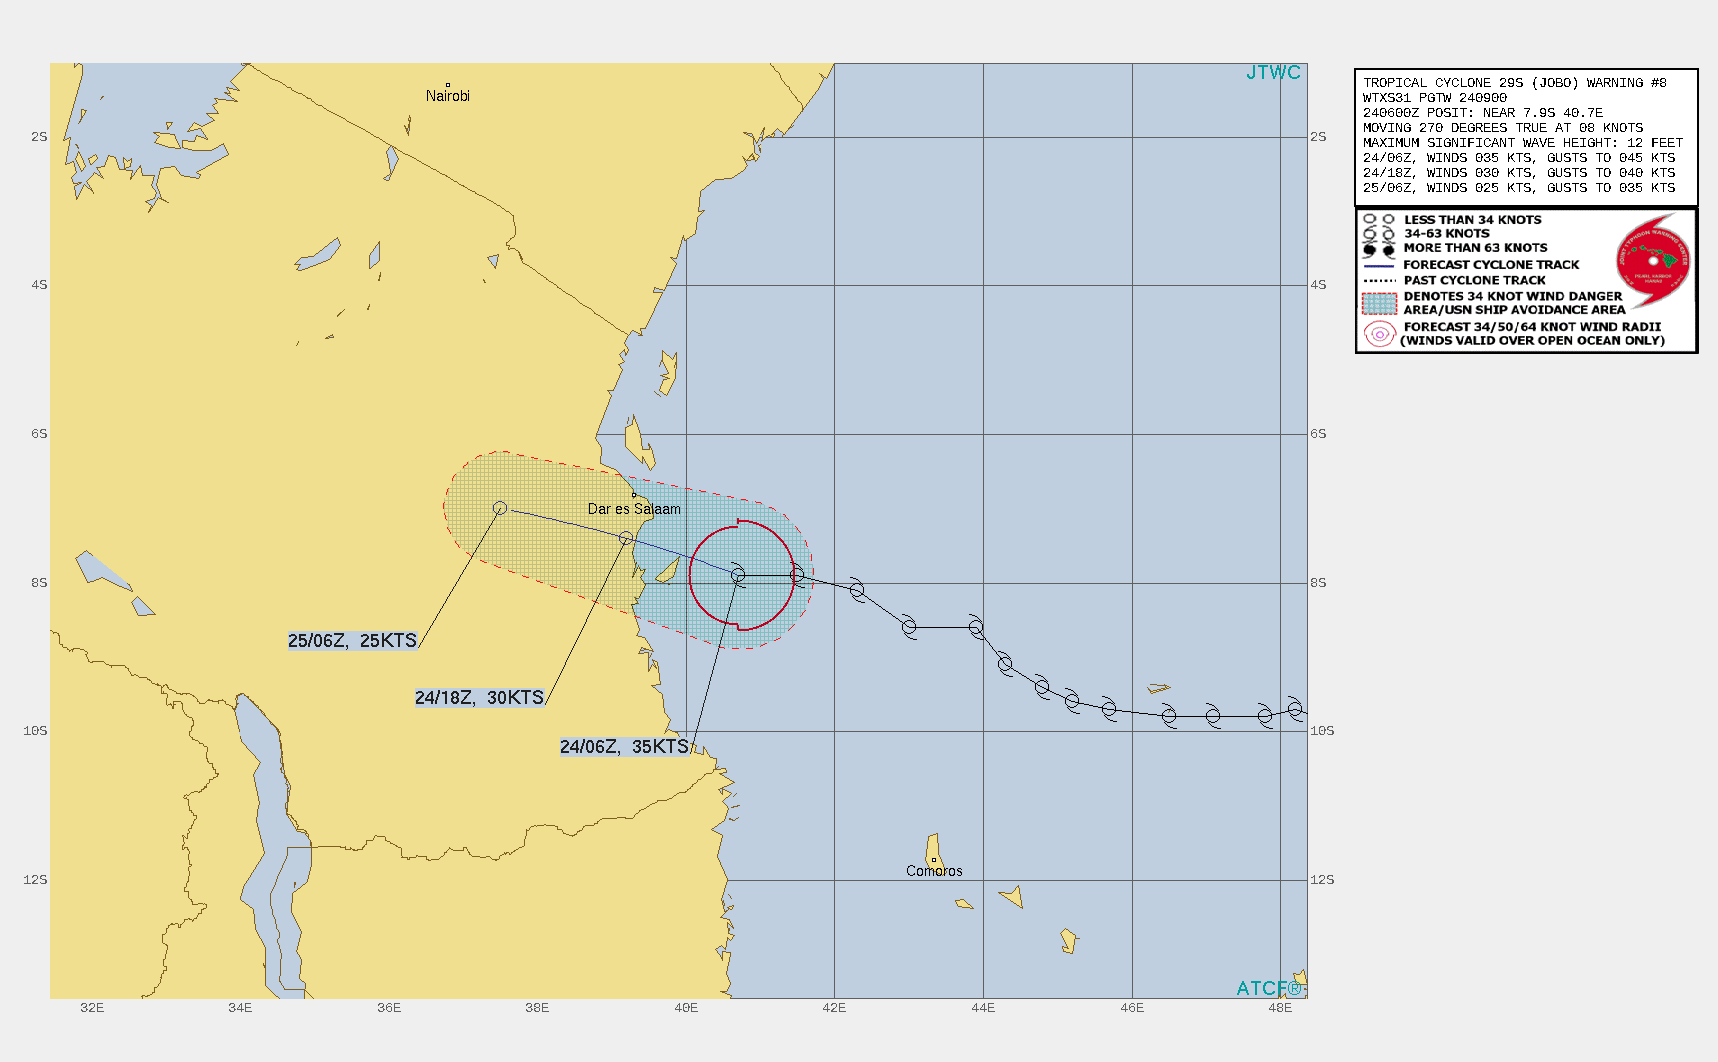 29S(JOBO). WARNING 8 ISSUED AT 24/09UTC.TC JOBO IS MOVING SLOWLY WEST-NORTHWESTWARD  ALONG THE NORTHERN PERIPHERY OF AN EAST-WEST ORIENTED LOW TO MID- LEVEL STR. THE OVERALL ENVIRONMENT REMAINS FAVORABLE, WITH LOW (10- 15KT) VWS, AND VERY WARM (29-30C) SSTS. THE MAIN HINDRANCE TO ANY  SIGNIFICANT DEVELOPMENT PRIOR TO LANDFALL IS THE PRESENCE OF A  REGION OF RELATIVELY DRIER AIR TO THE WEST, PROHIBITING THE RECENT  FLARING CONVECTION FROM EXPANDING AND PERSISTING. JOBO IS EXPECTED  TO MAKE LANDFALL JUST SOUTH OF DAR ES SALAAM WITHIN THE NEXT 12  HOURS AS A MINIMAL TROPICAL STORM, BEFORE MOVING RAPIDLY INLAND AND  QUICKLY DISSIPATING.